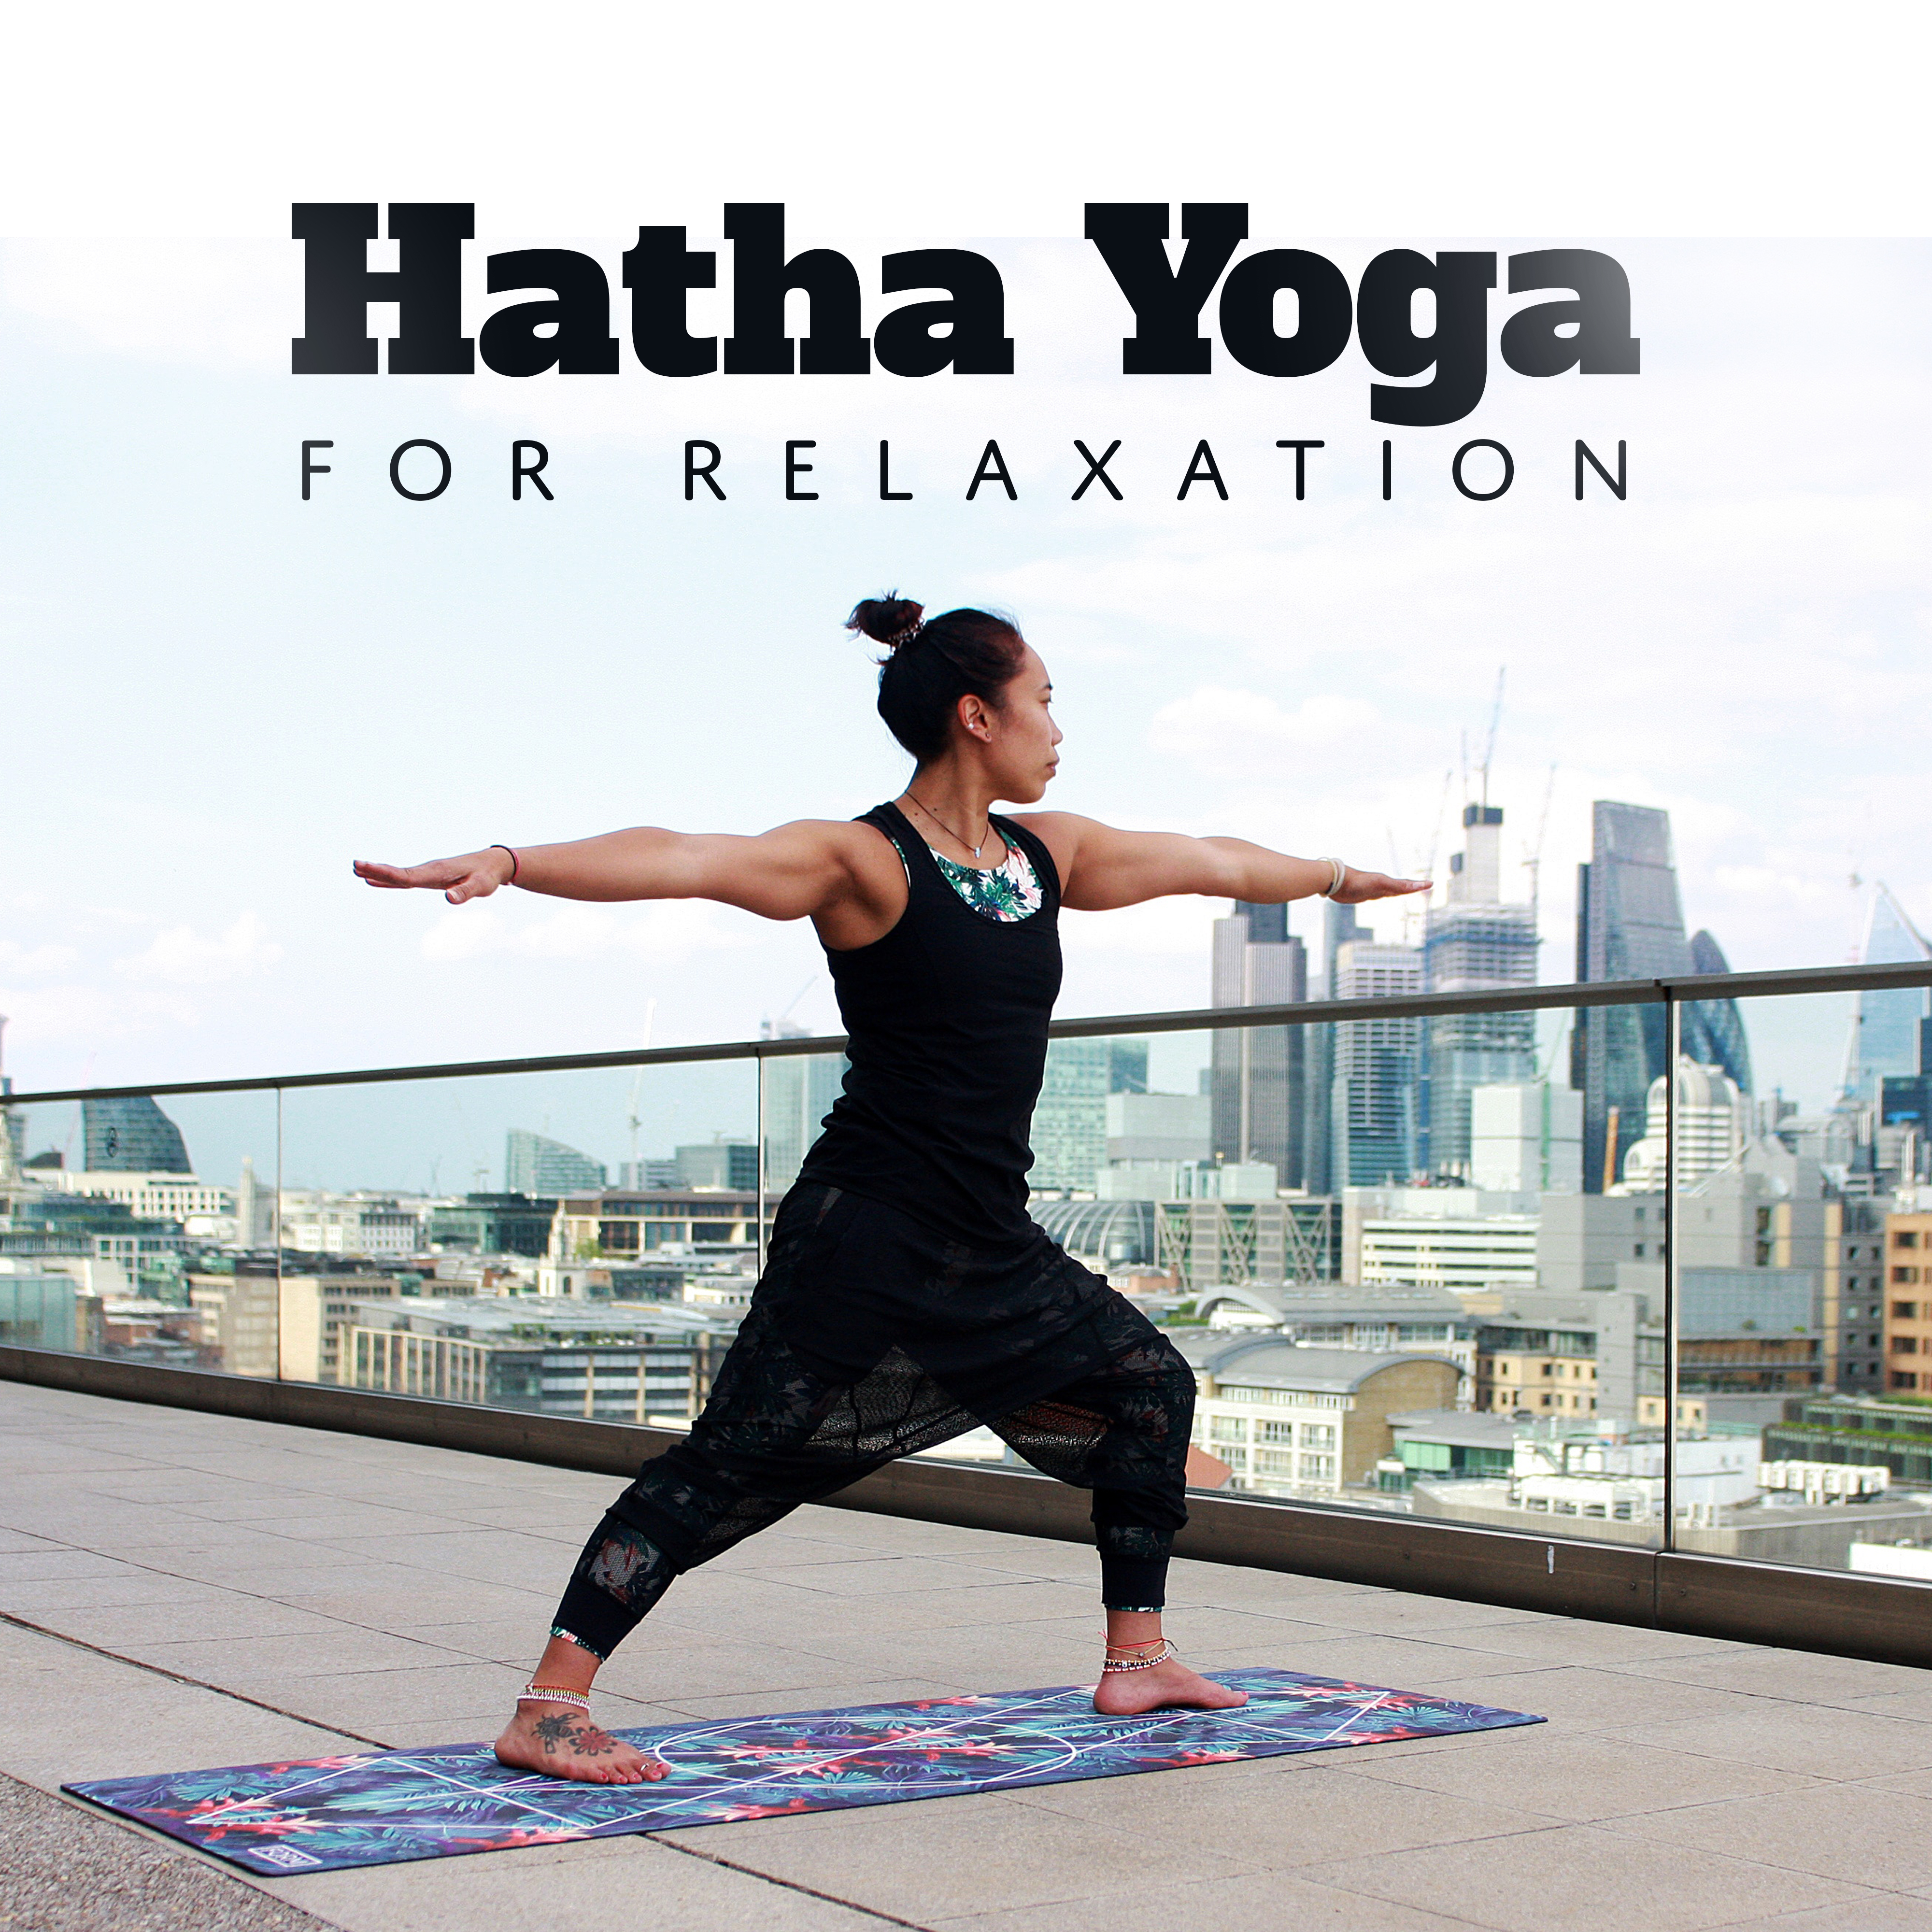 Hatha Yoga for Relaxation